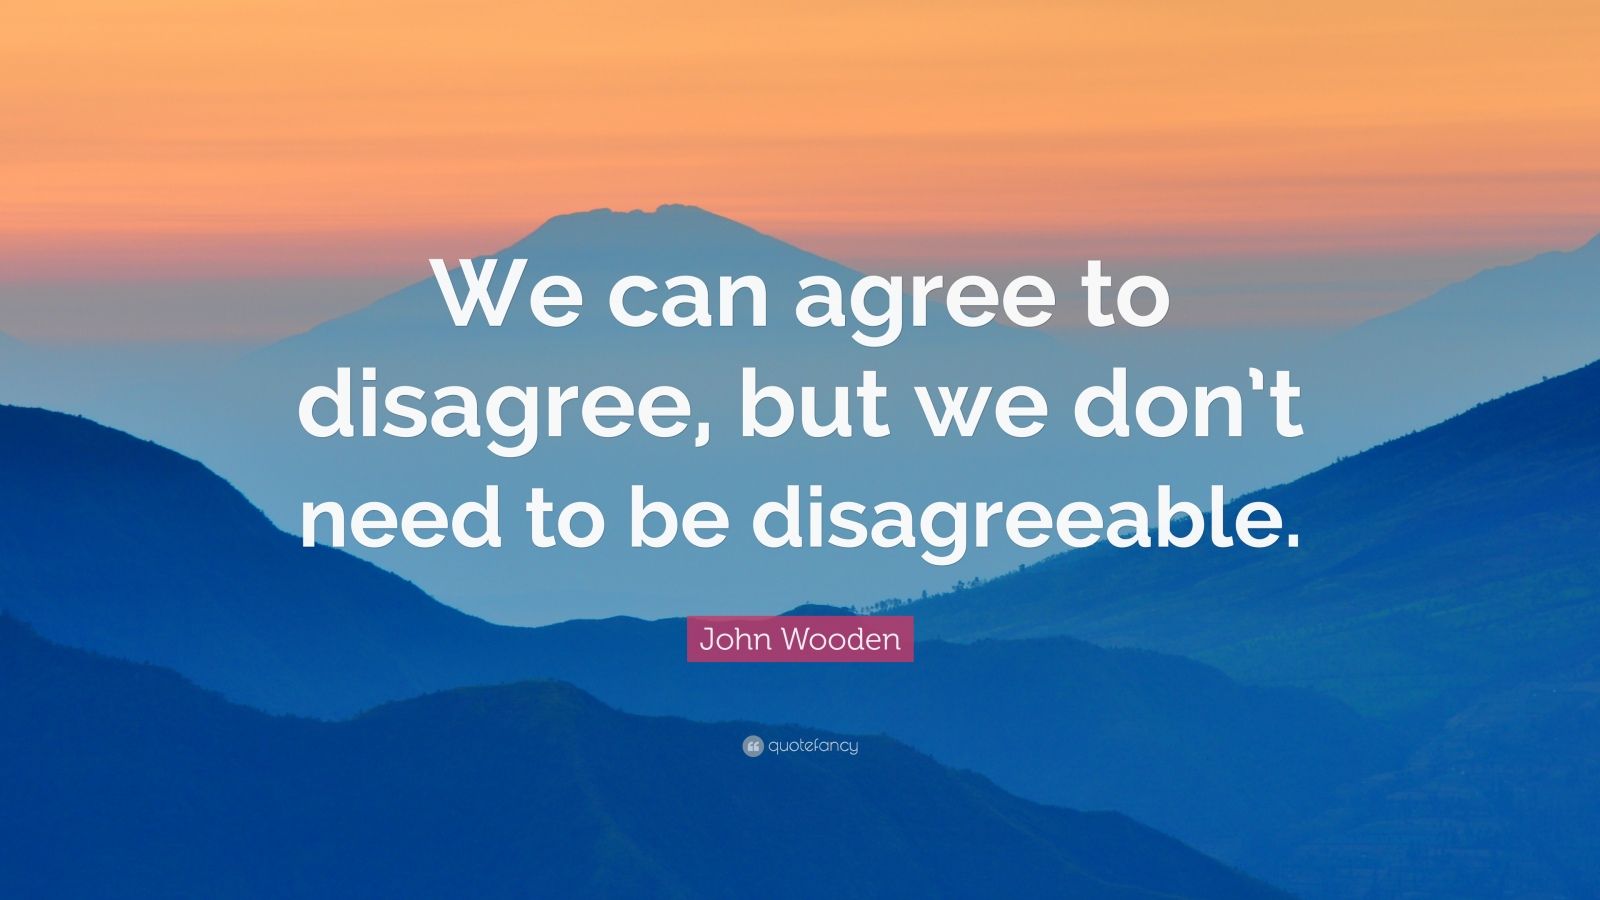 John Wooden Quote: “We can agree to disagree, but we don’t need to be